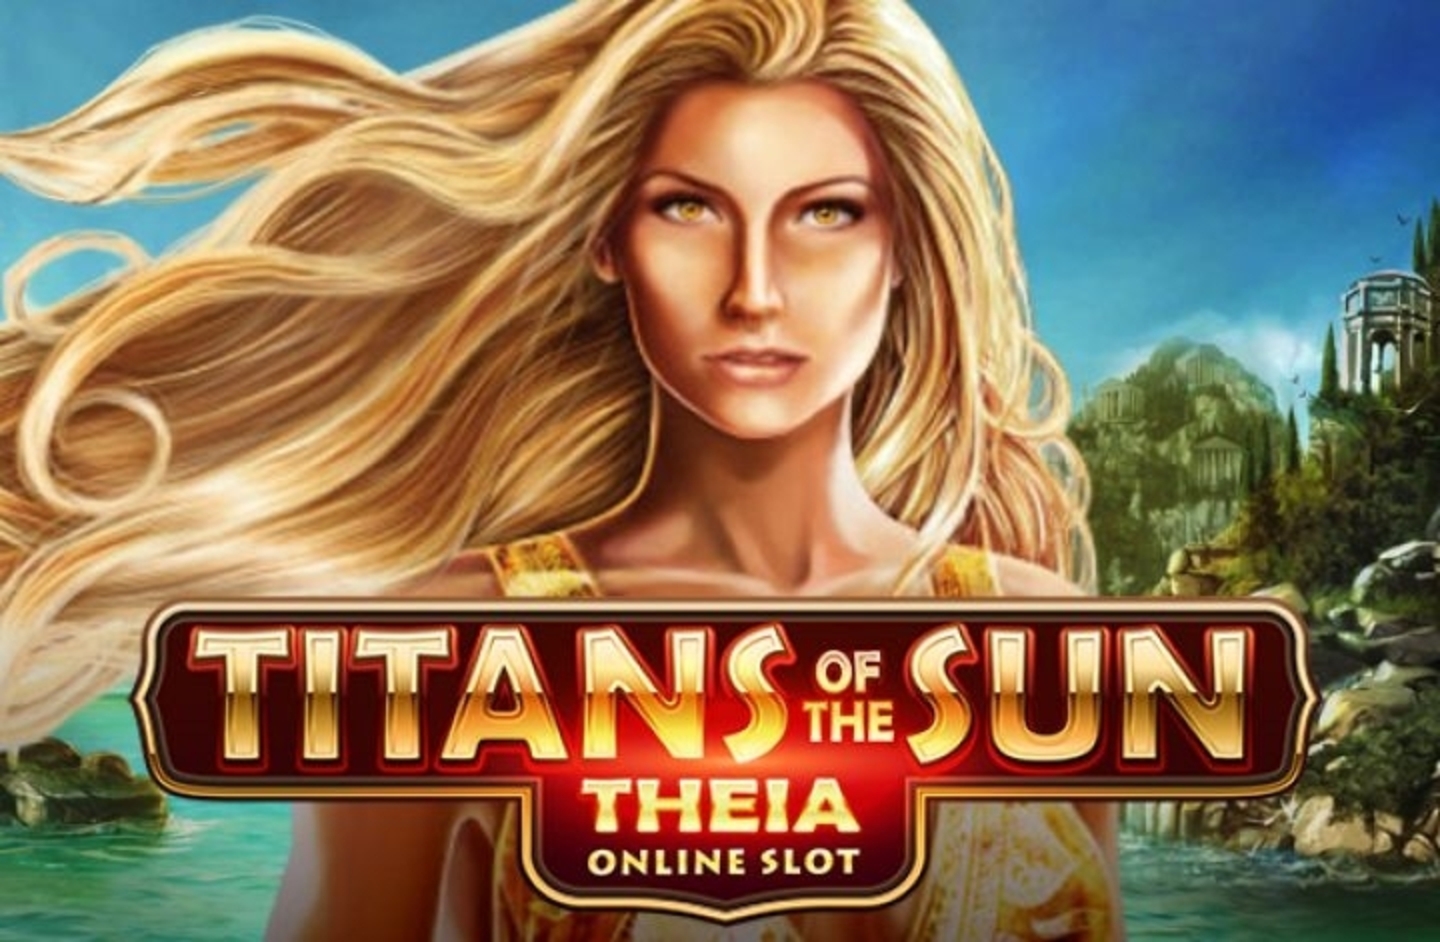 The Titans of the Sun Theia Online Slot Demo Game by Microgaming